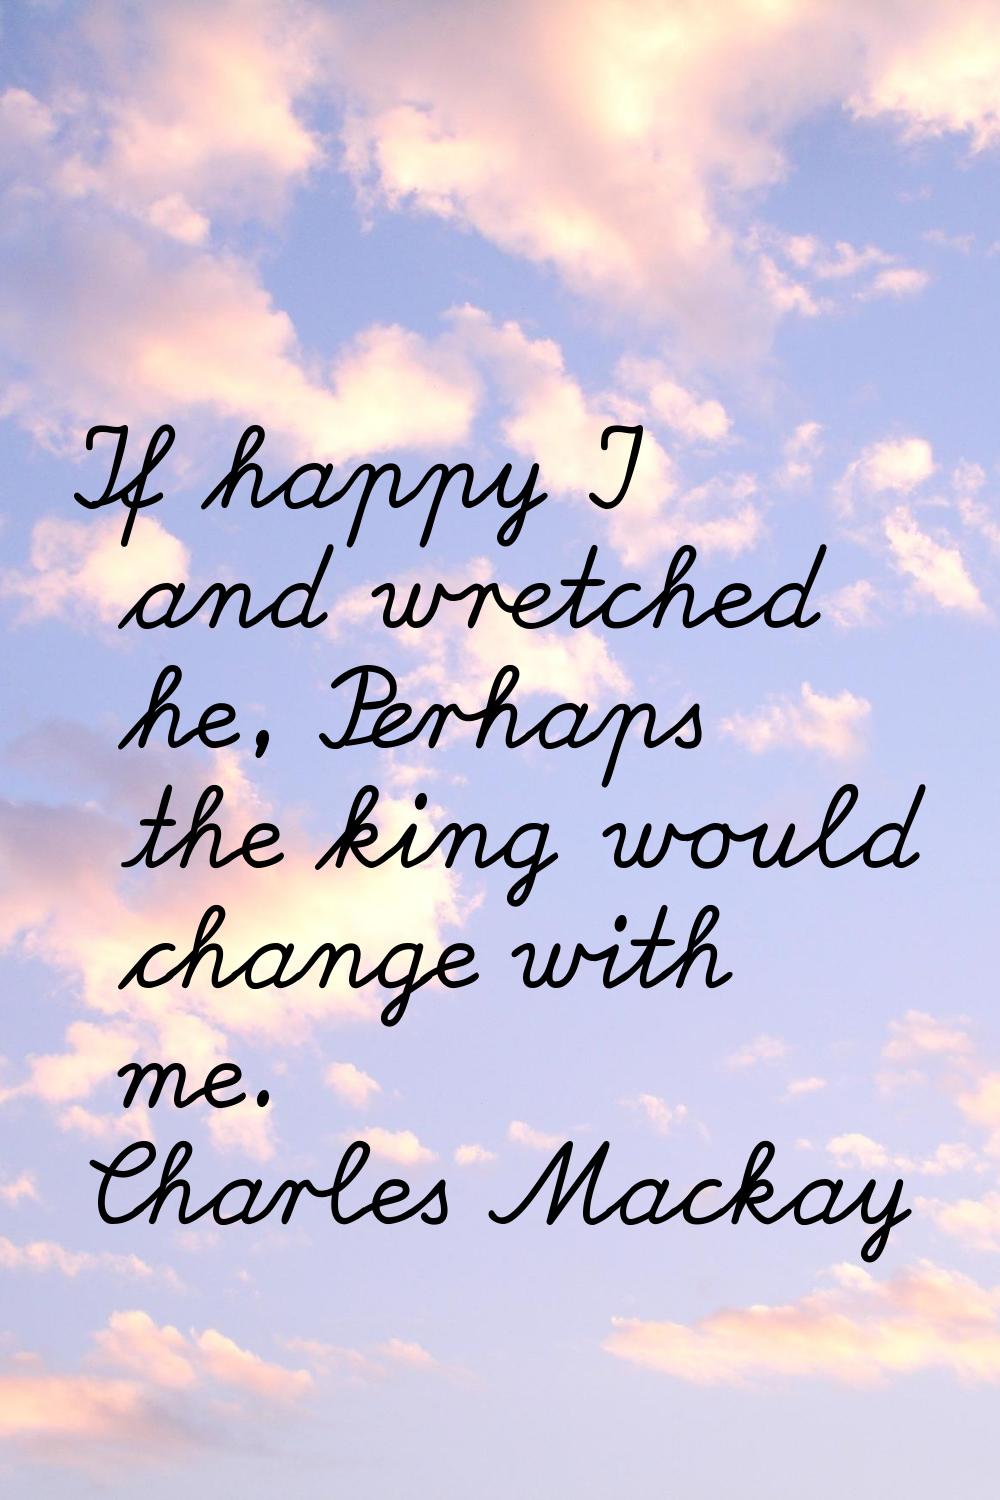 If happy I and wretched he, Perhaps the king would change with me.